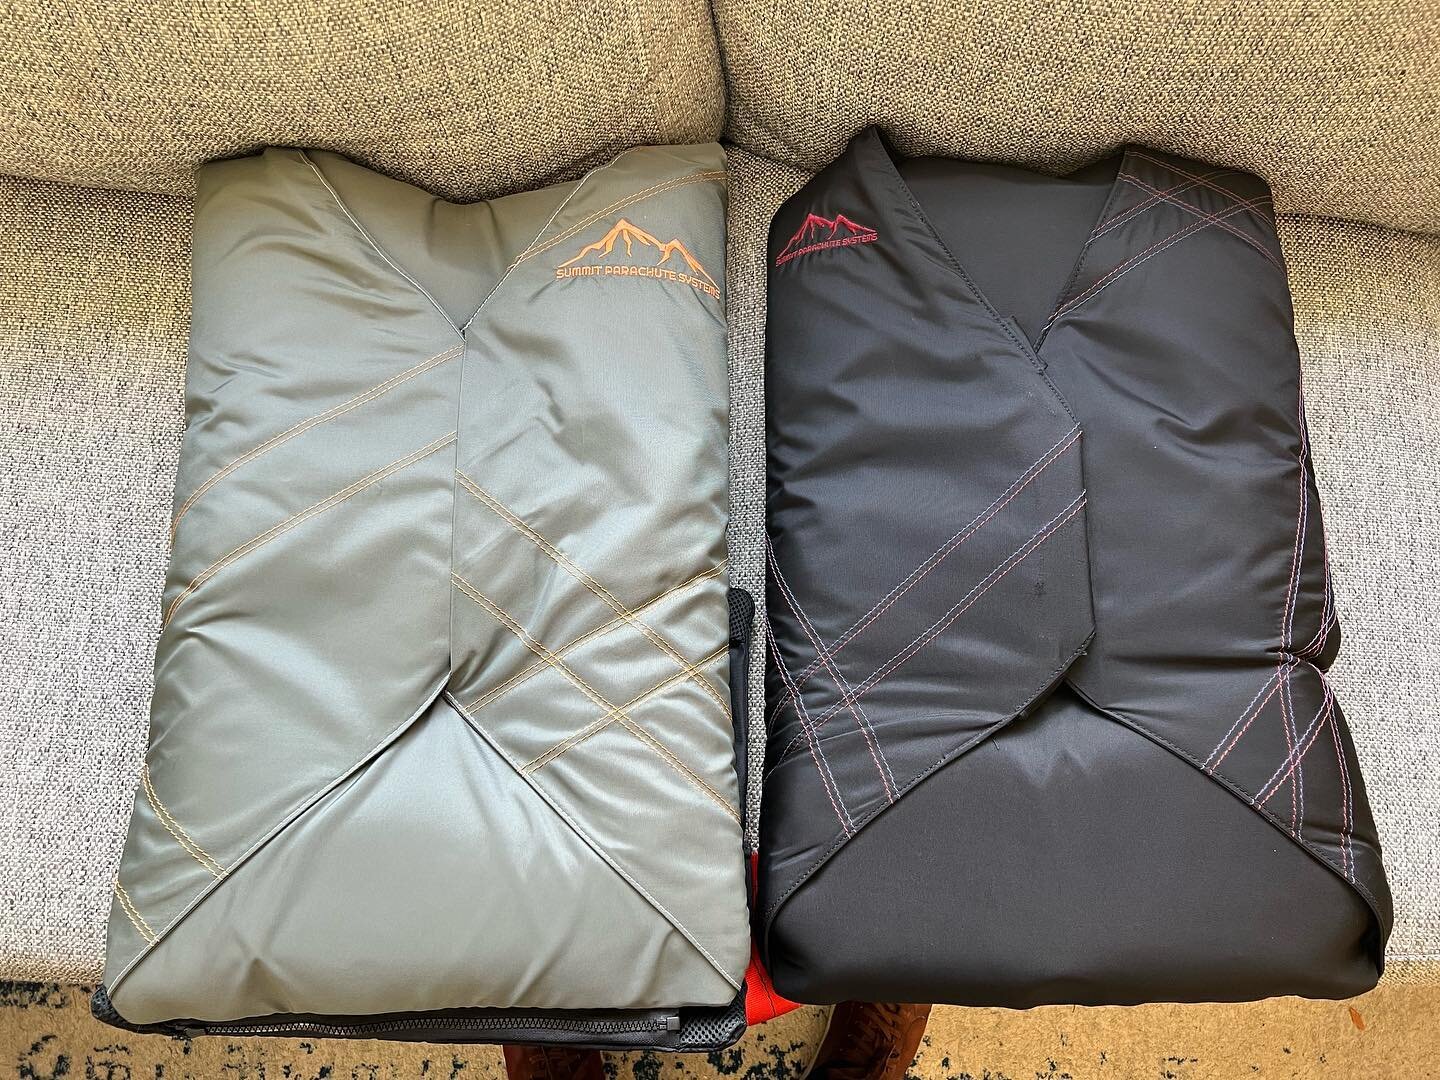 It&rsquo;s @summitparachute central at the Pollard household! Jarrett sent me a new rig and I couldn&rsquo;t be happier!! The refinements and advancements on the new container are so freaking nice! My old Summit rig was already much improved over the